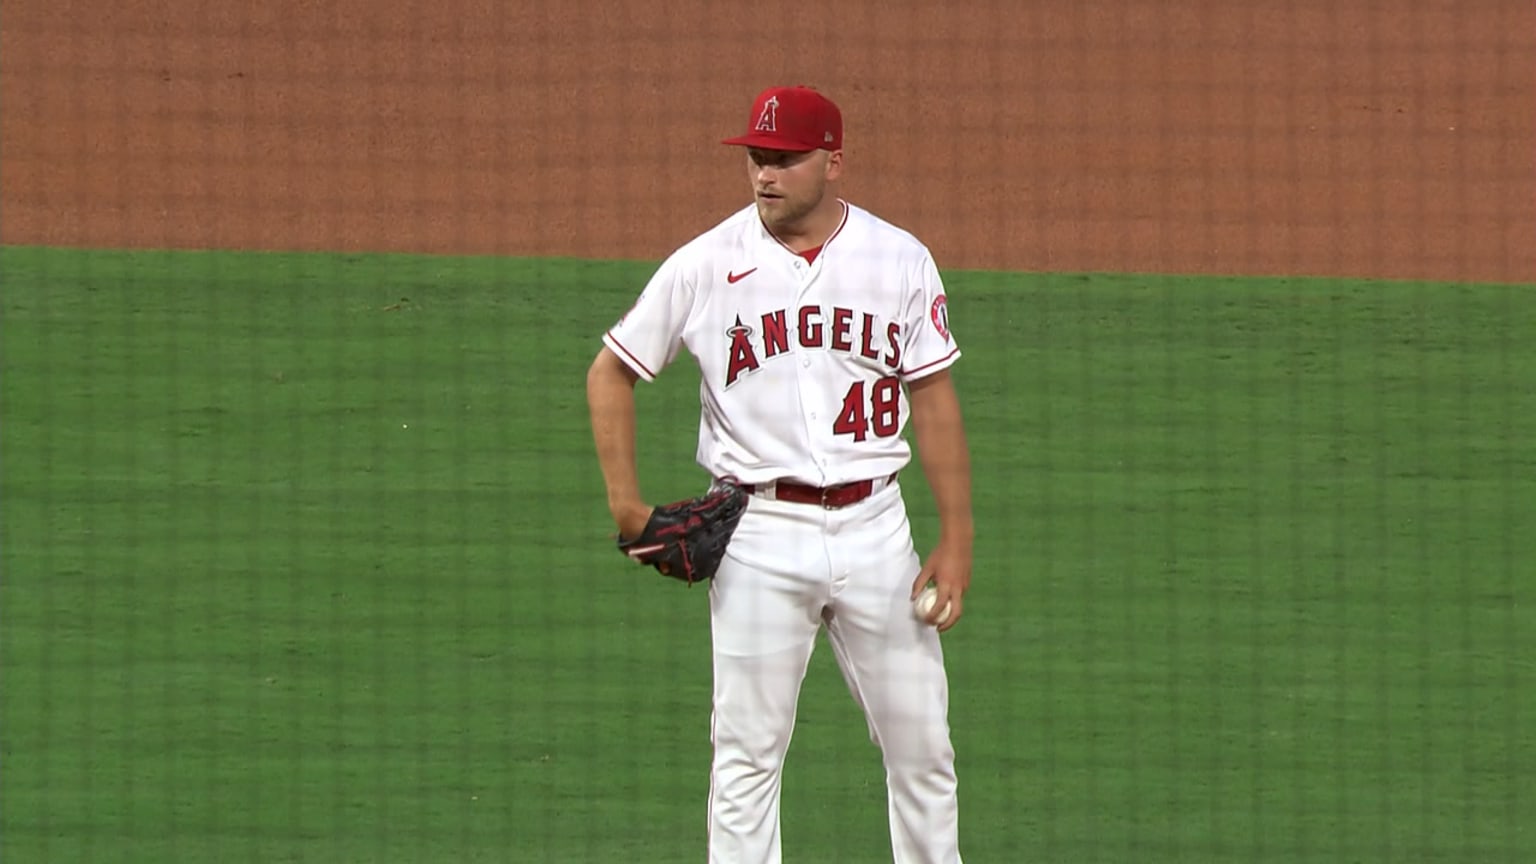 Reid Detmers struggles after good start in Angels' loss to Brewers – Orange  County Register